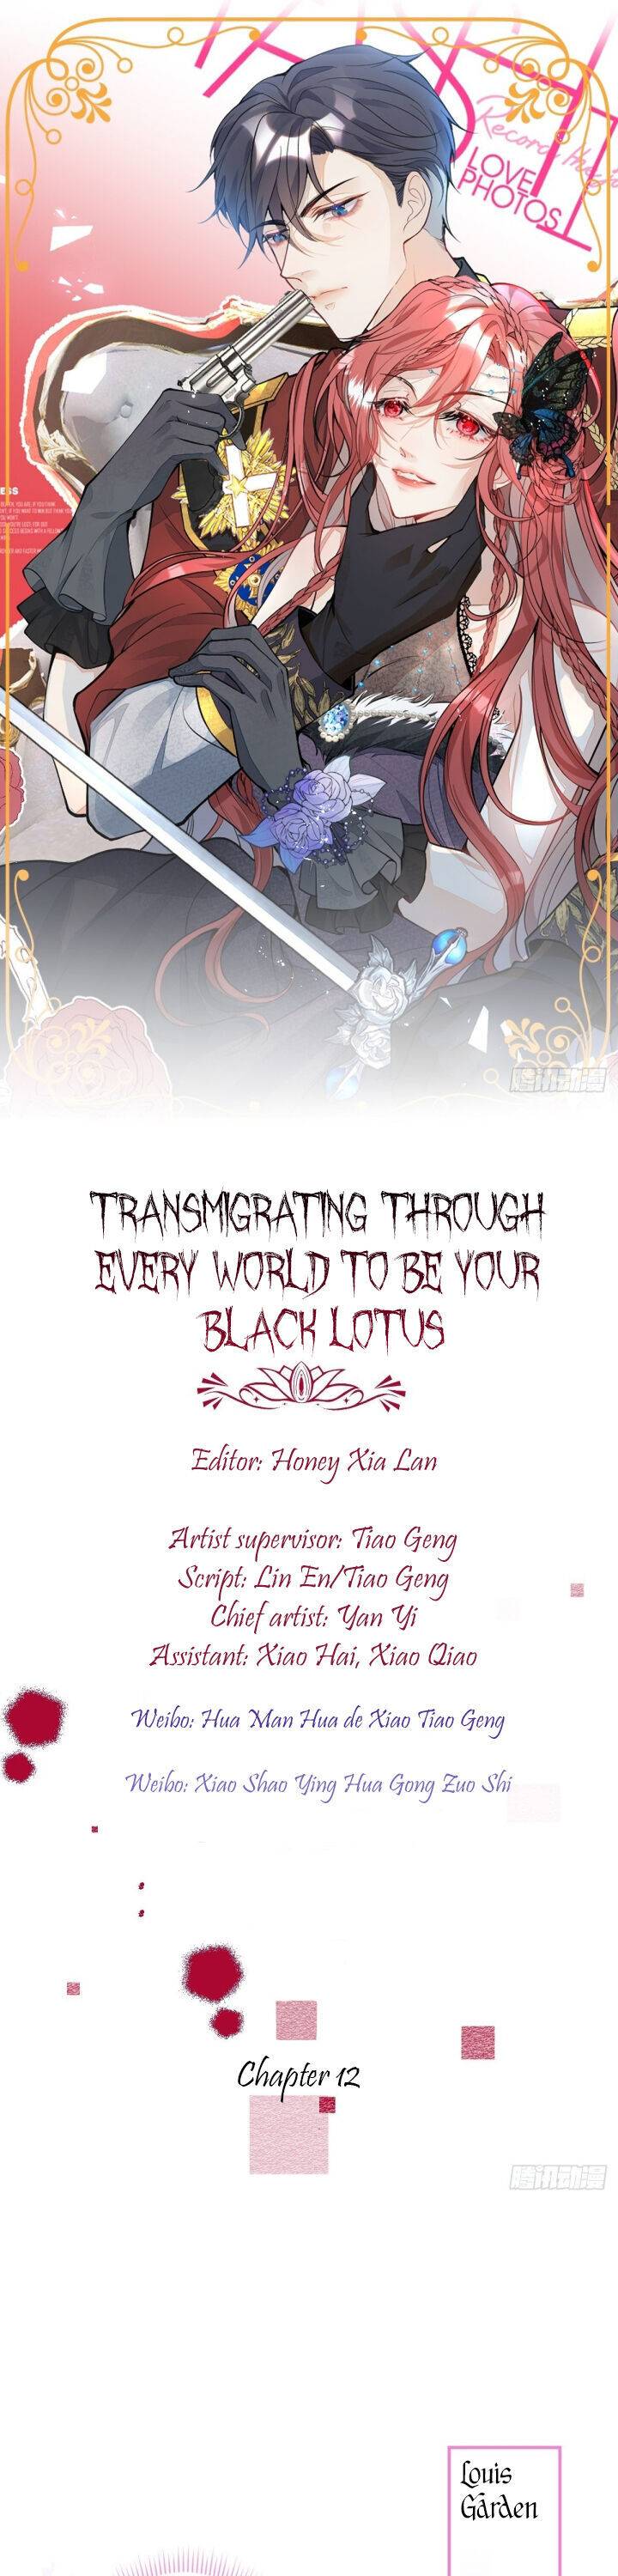 Transmigrating Through Every World To Be Your Black Lotus - Page 1